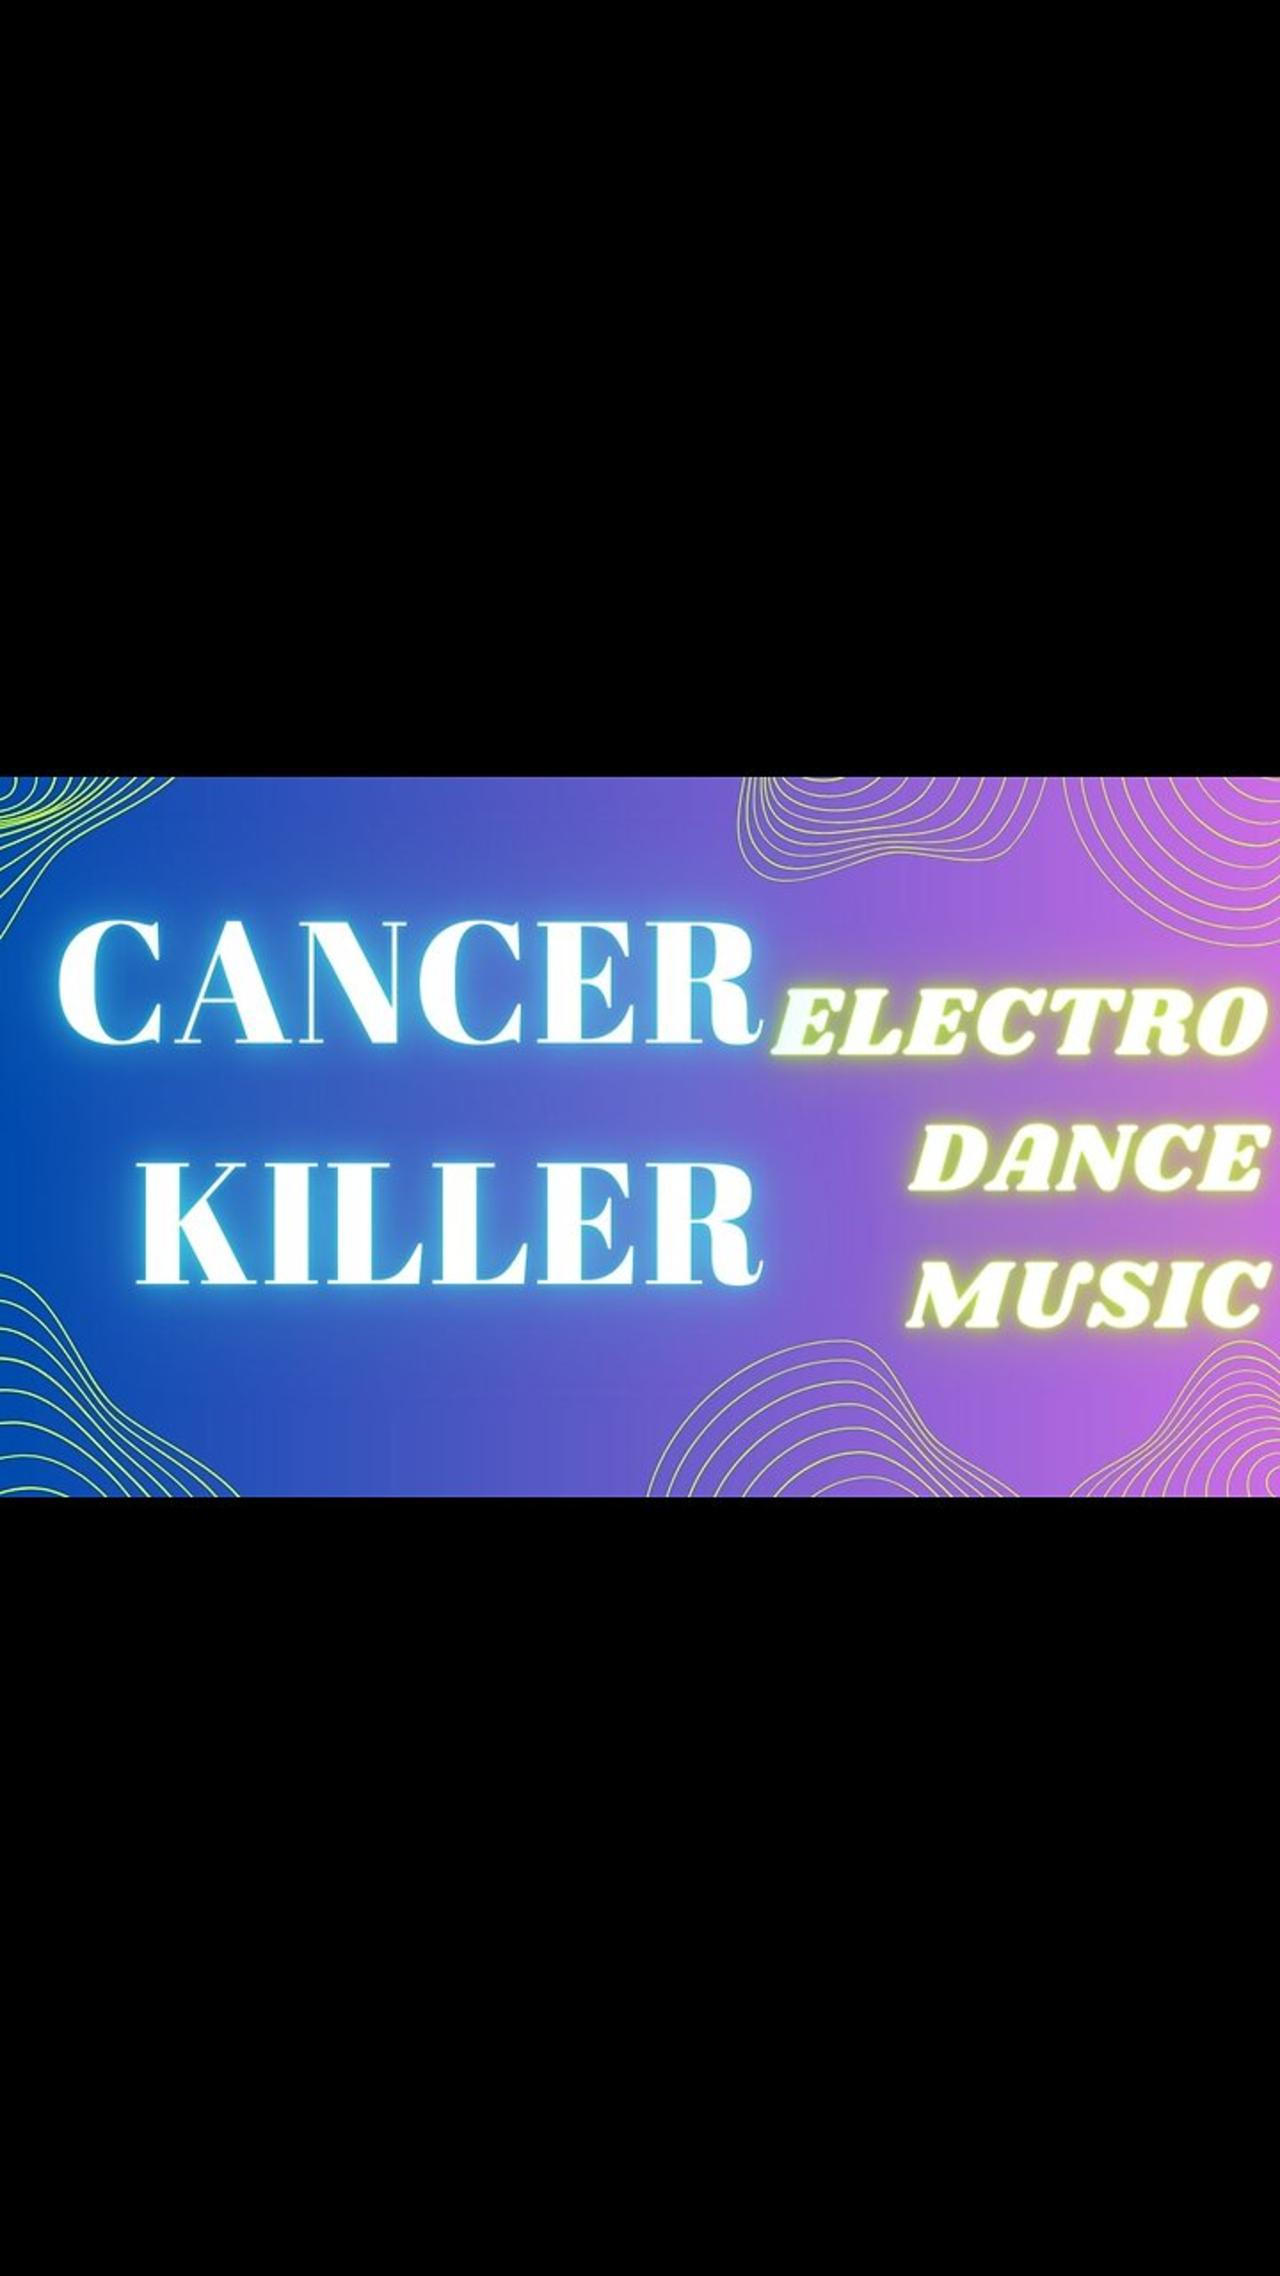 Cancer Killer – One News Page VIDEO